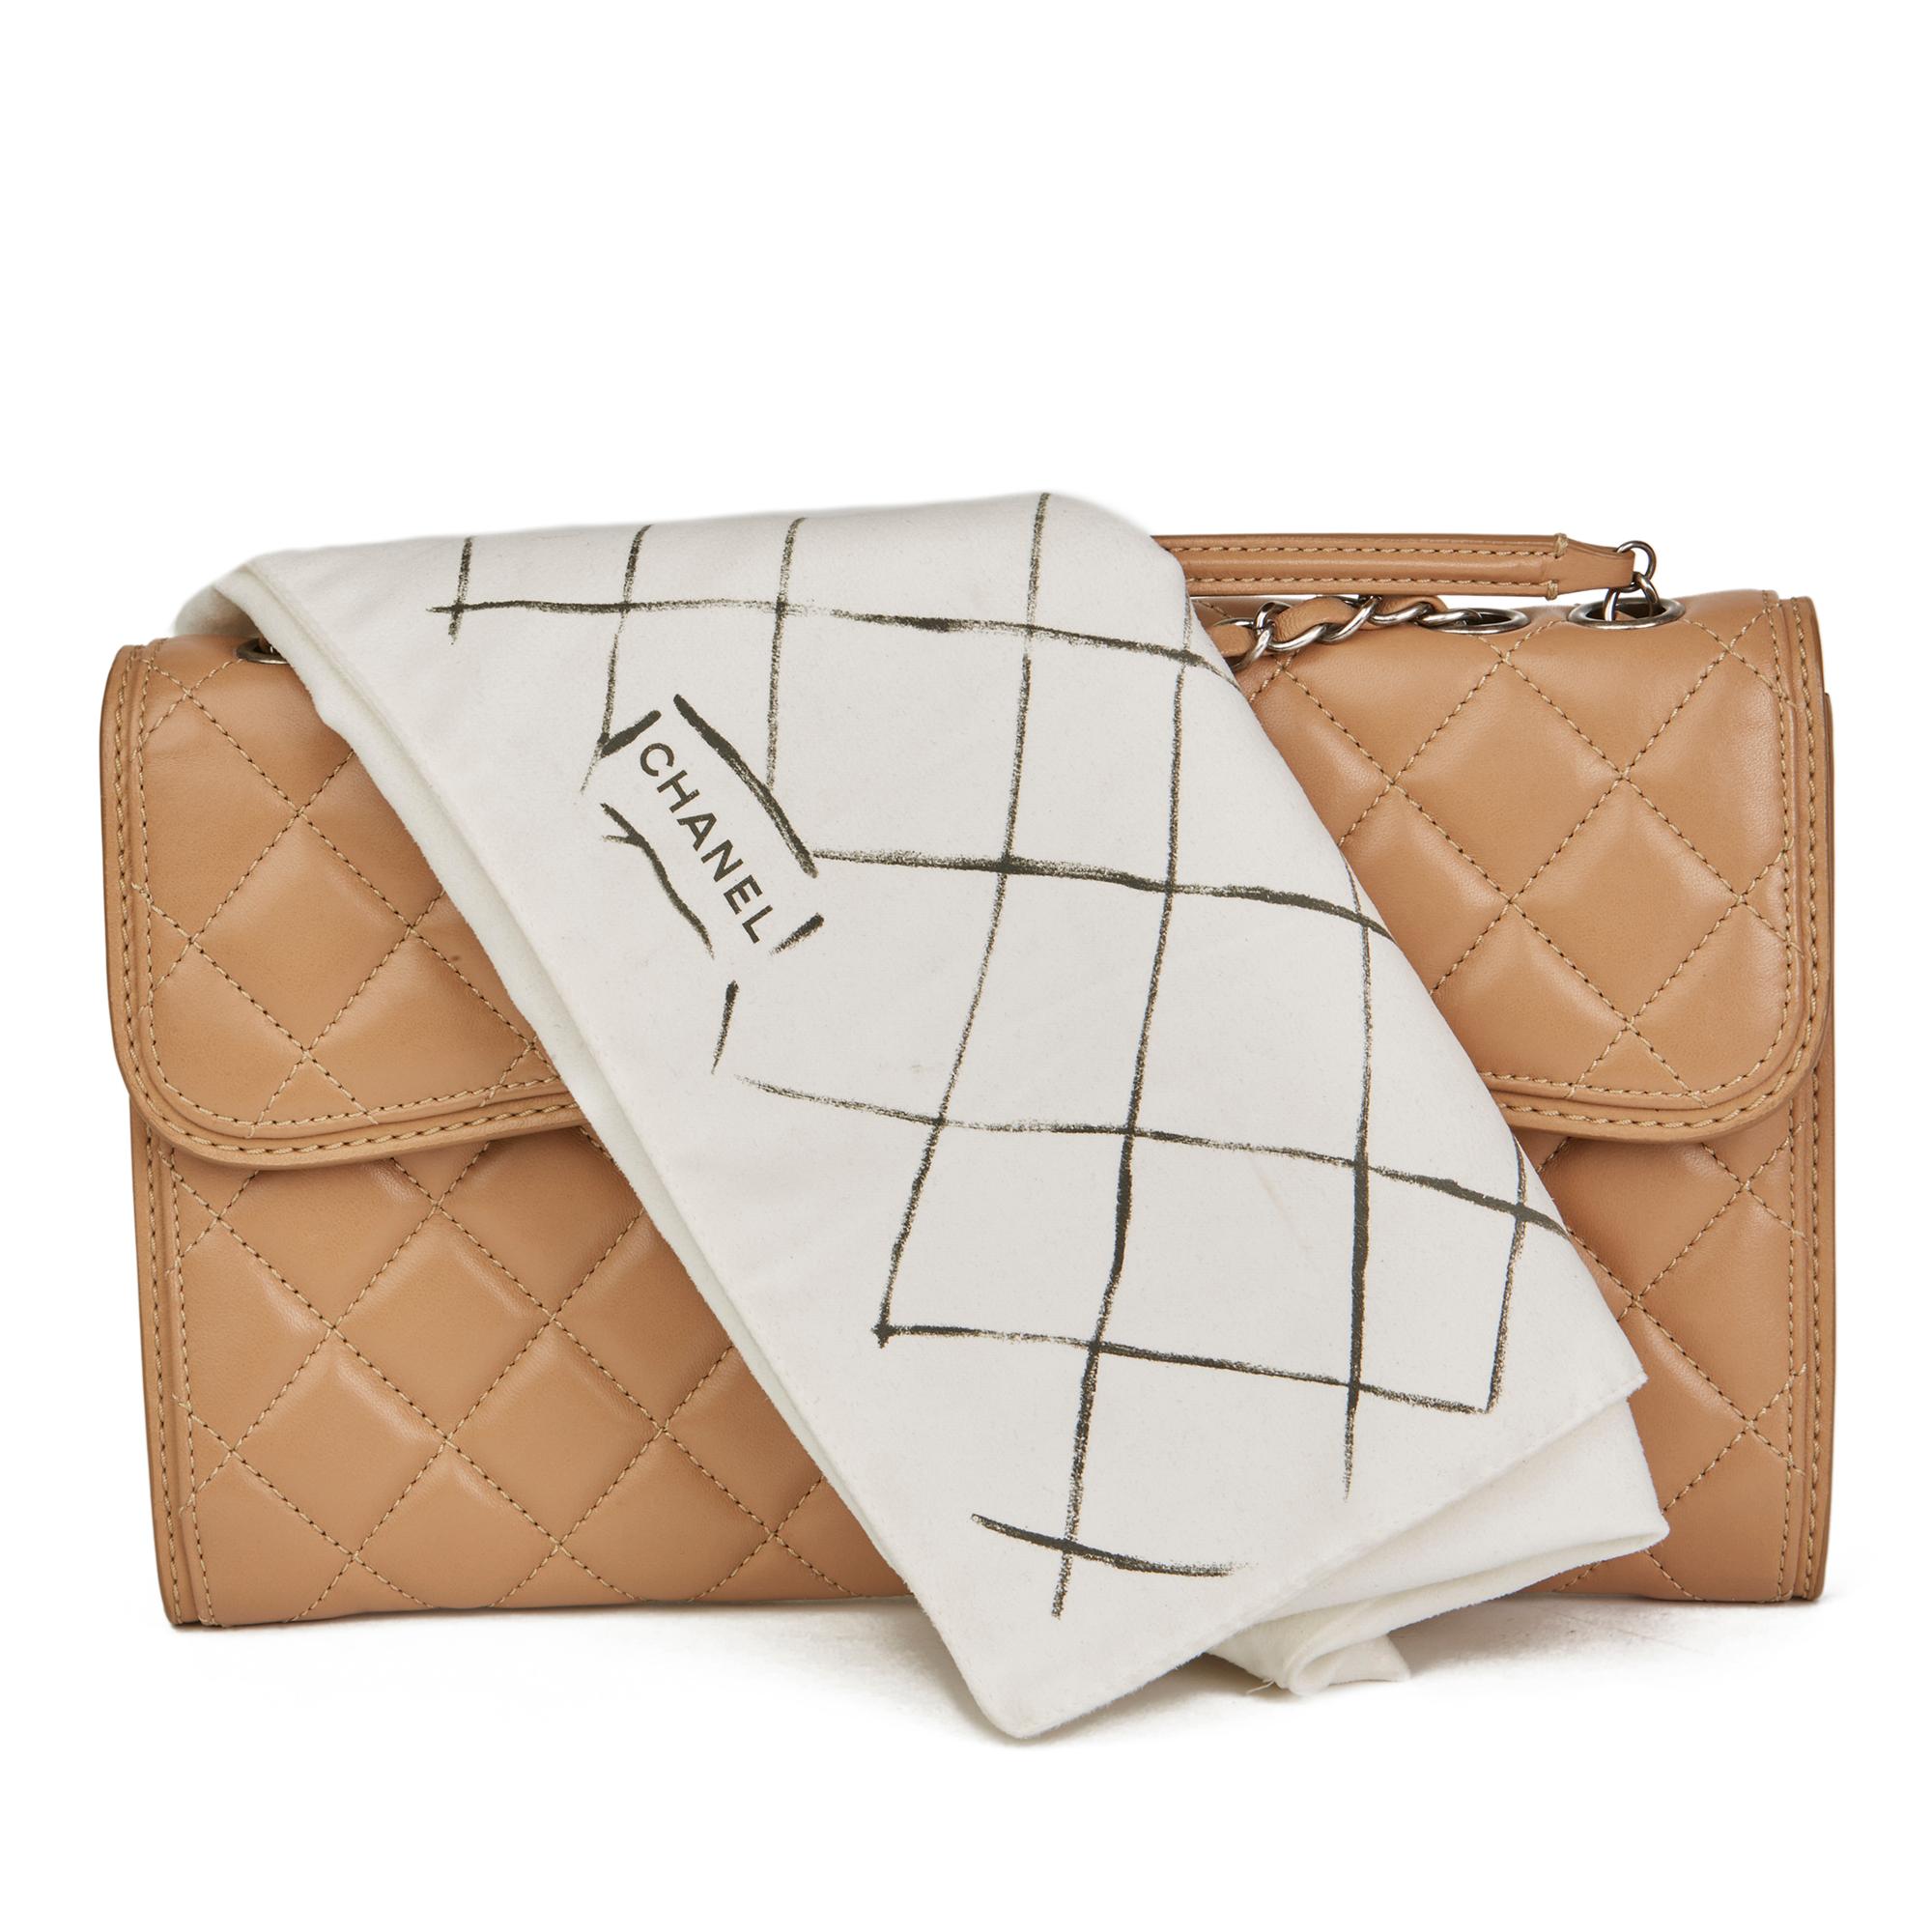 2014 Chanel Mocha Quilted Lambskin Classic Single Flap Bag 5